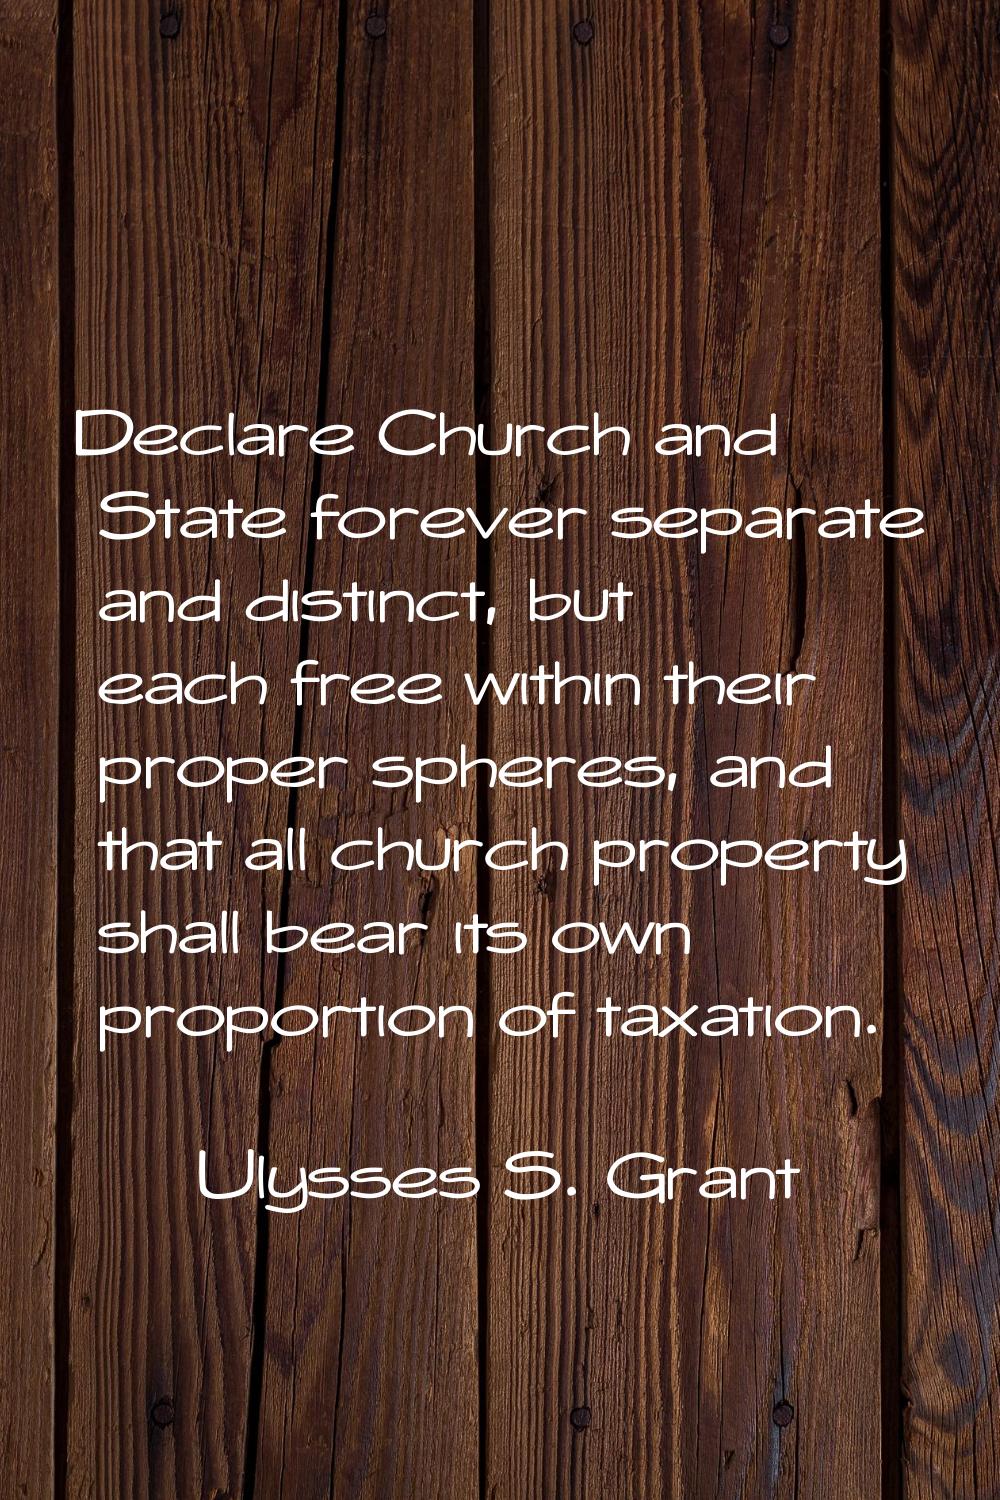 Declare Church and State forever separate and distinct, but each free within their proper spheres, 